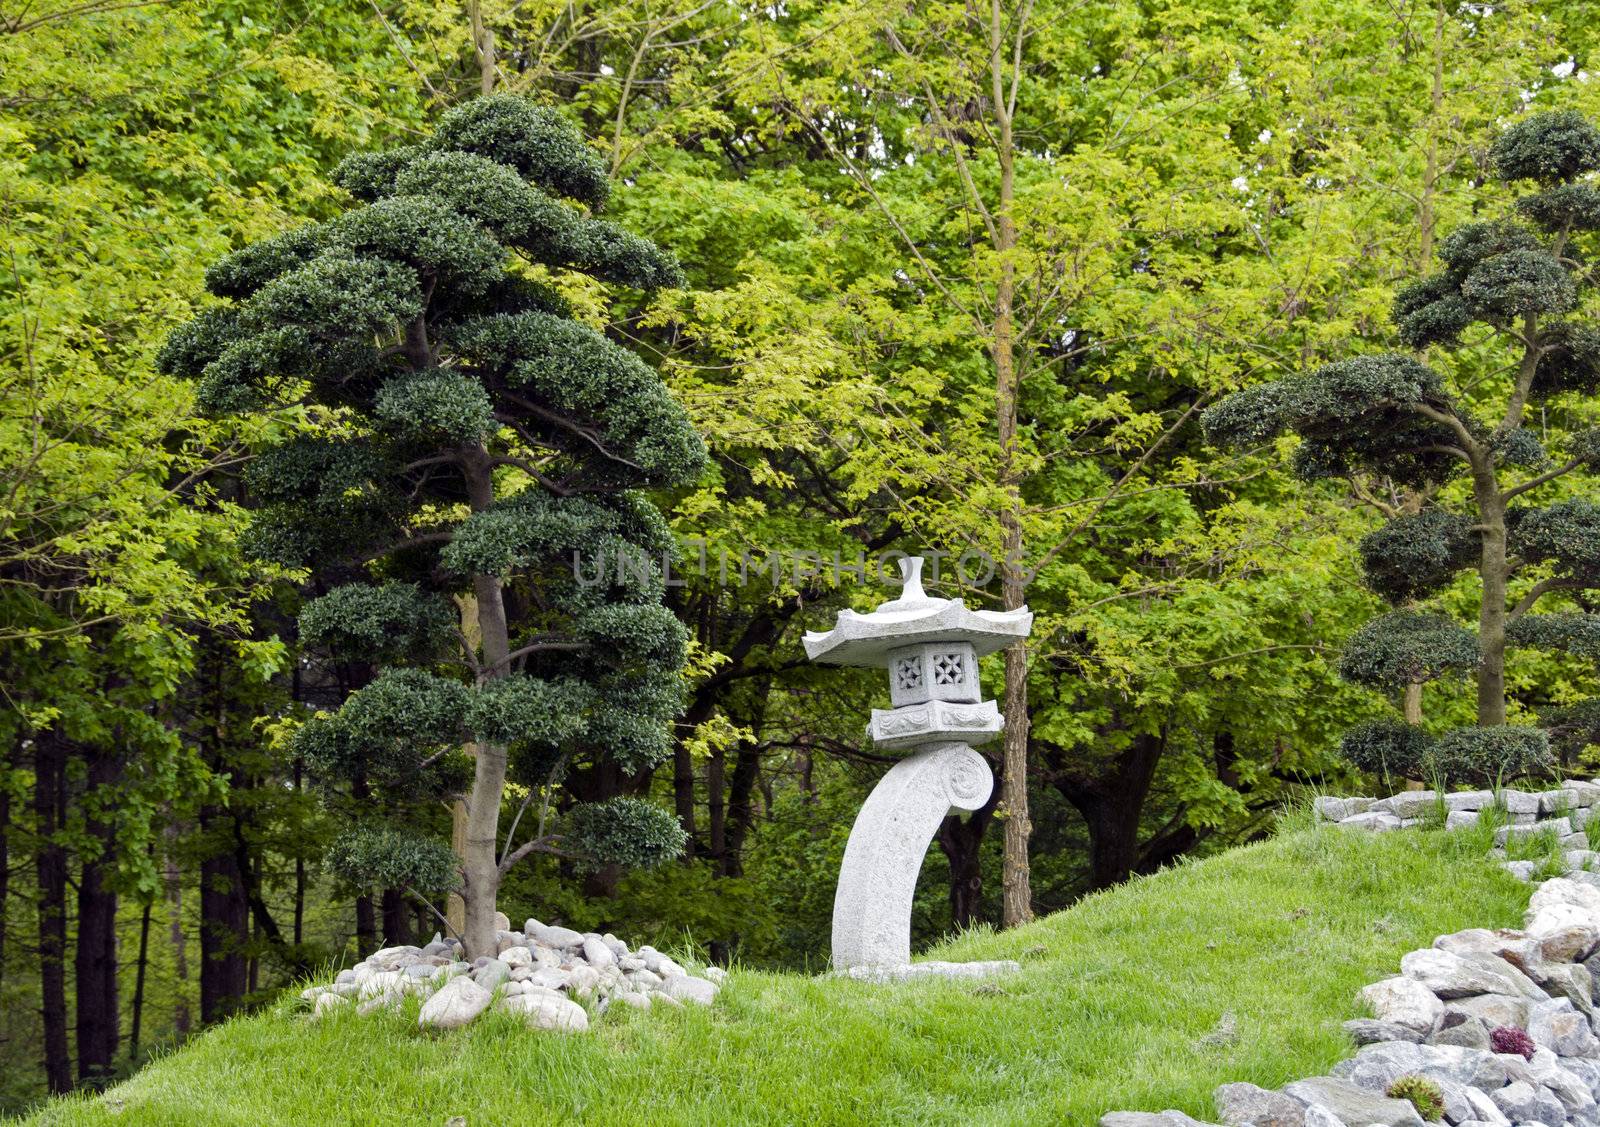 bonsai trees in japanese garden by compuinfoto